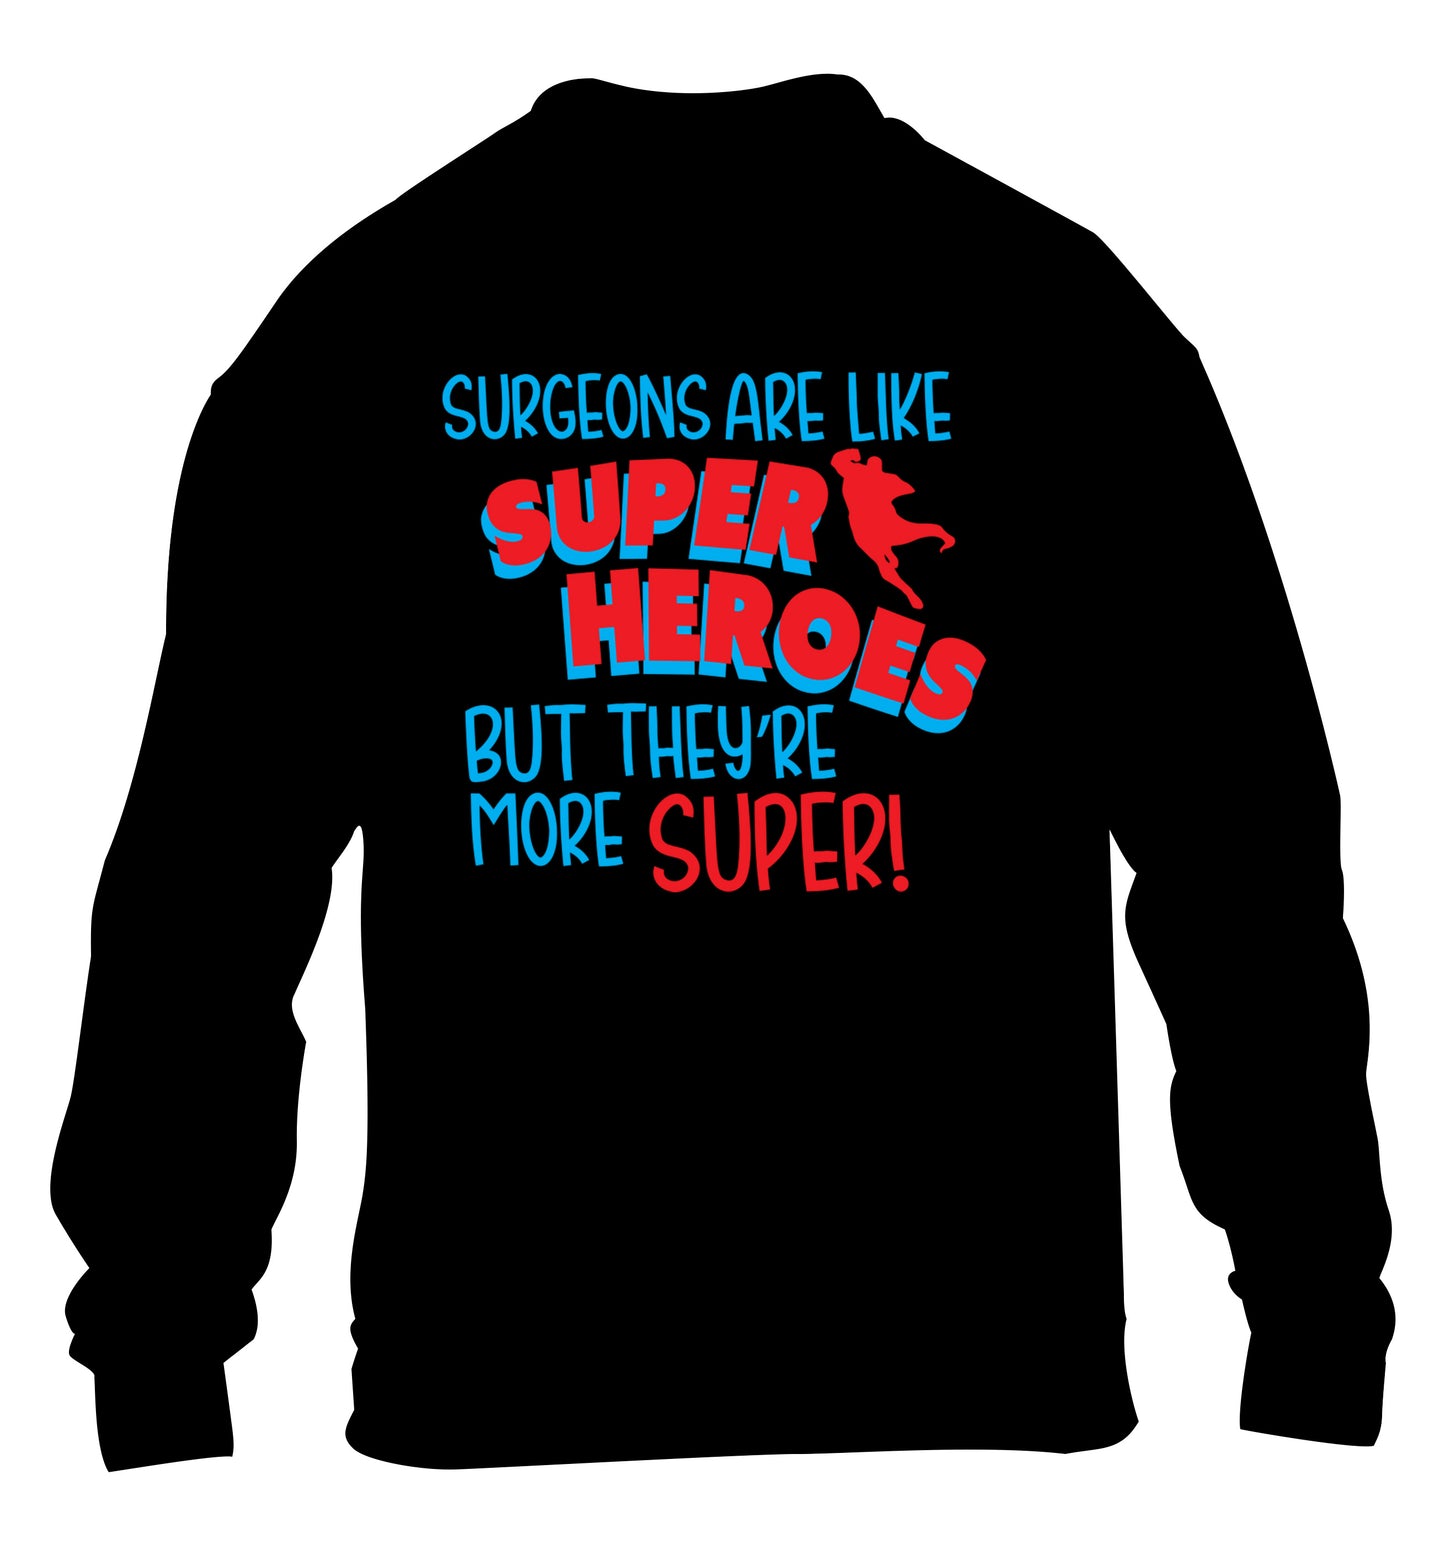 Surgeons are like superheros but they're more super children's black sweater 12-13 Years